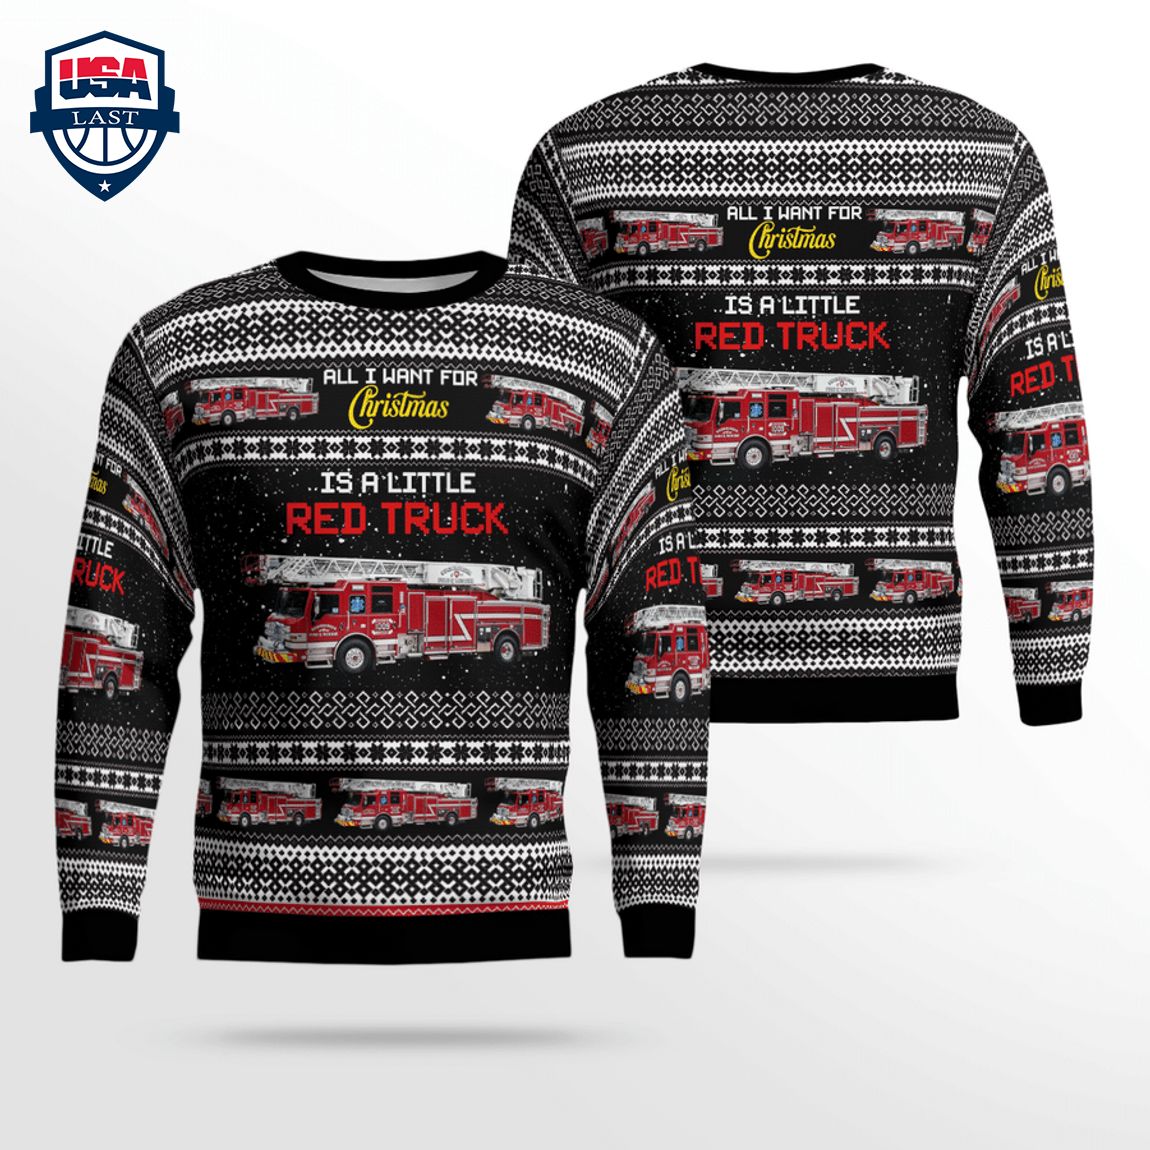 Sugarcreek Fire & Rescue All I Want For Christmas Is A Little Red Truck 3D Christmas Sweater